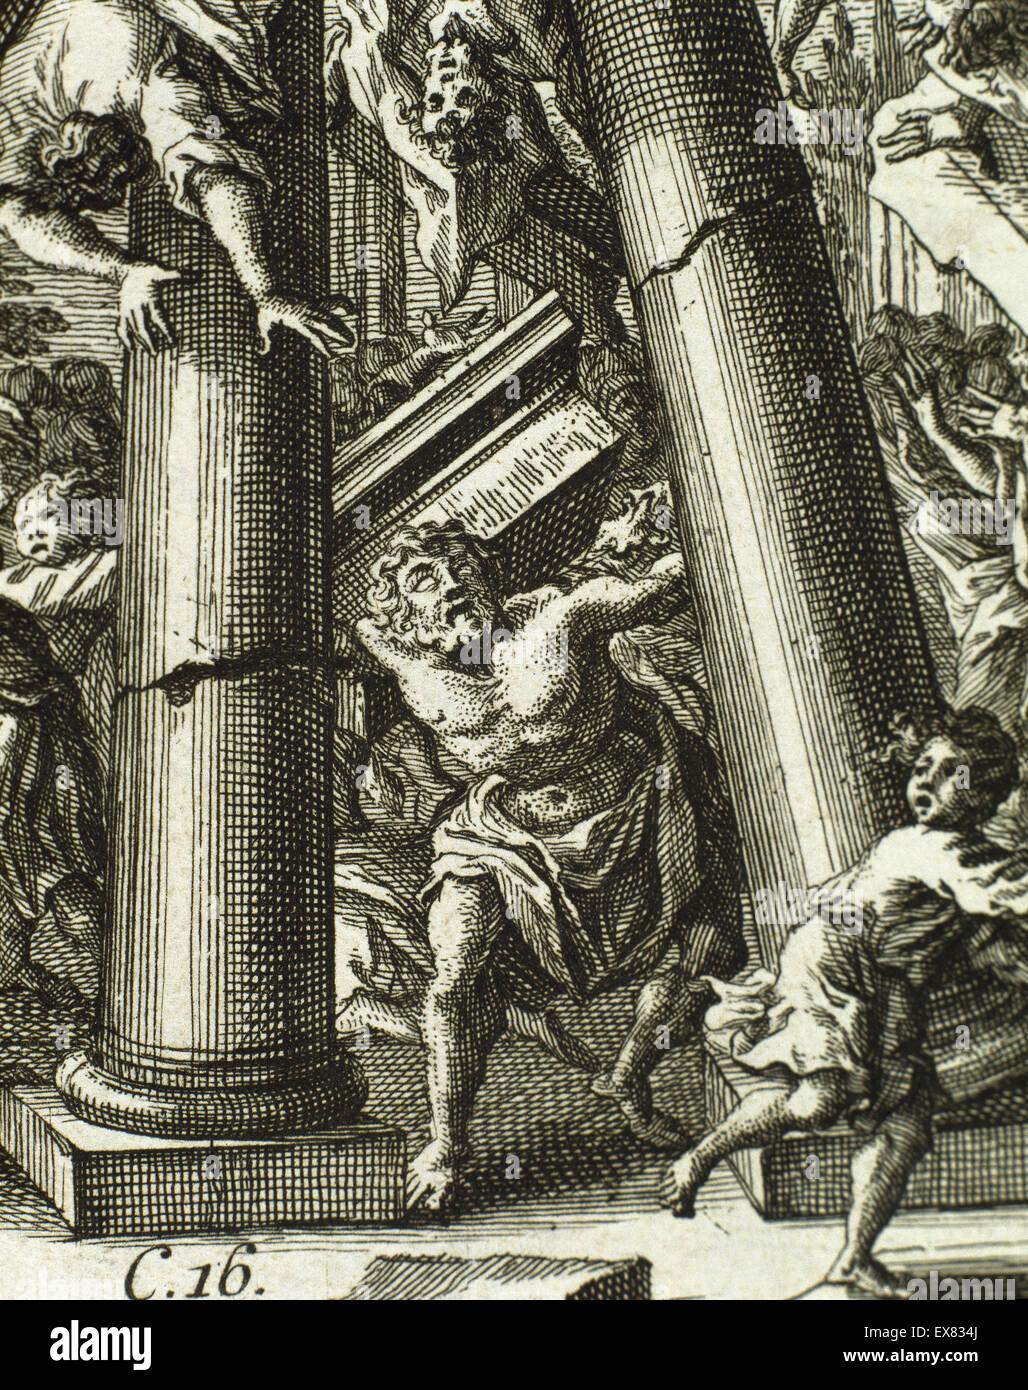 Samson destroying the temple of Dagon. Book of Judges. Chapter 16. Engraving. Stock Photo